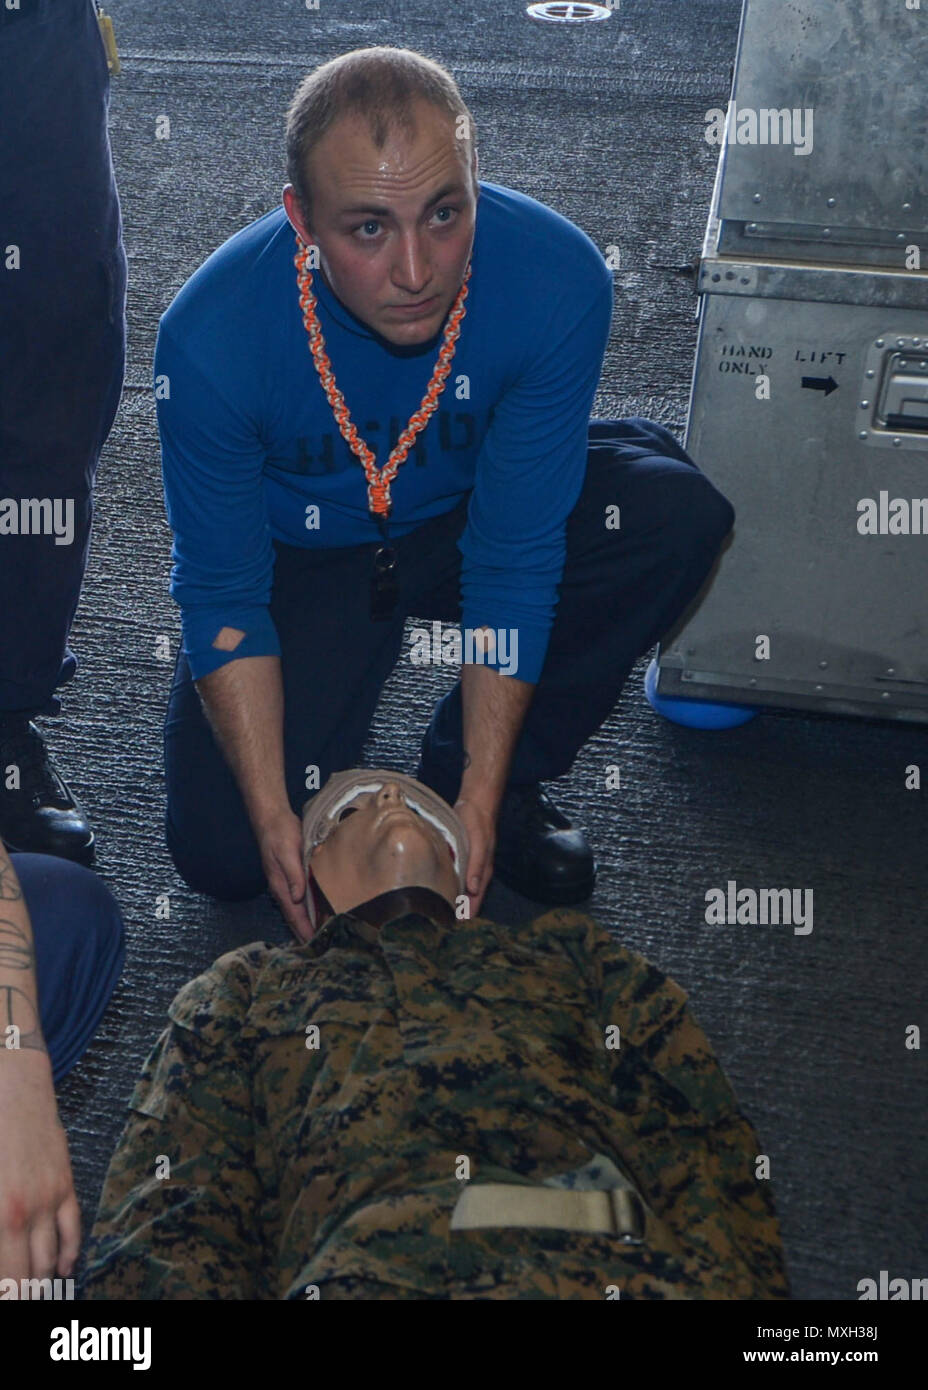 161101-N-EW322-008PACIFIC OCEAN (Nov. 1, 2016) Seaman Alex Pierce, from Walker, Iowa, stabilizes the neck of a simulated casualty during a medical drill in the hangar bay aboard the amphibious assault ship USS Makin Island (LHD 8).  Makin Island, the flagship of the Makin Island Amphibious Ready Group, is operating in the U.S. 7th Fleet area of operations in support security and stability in the Indo-Asia-Pacific region.  (U.S. Navy photo by Seaman Clark Lane/Released) Stock Photo